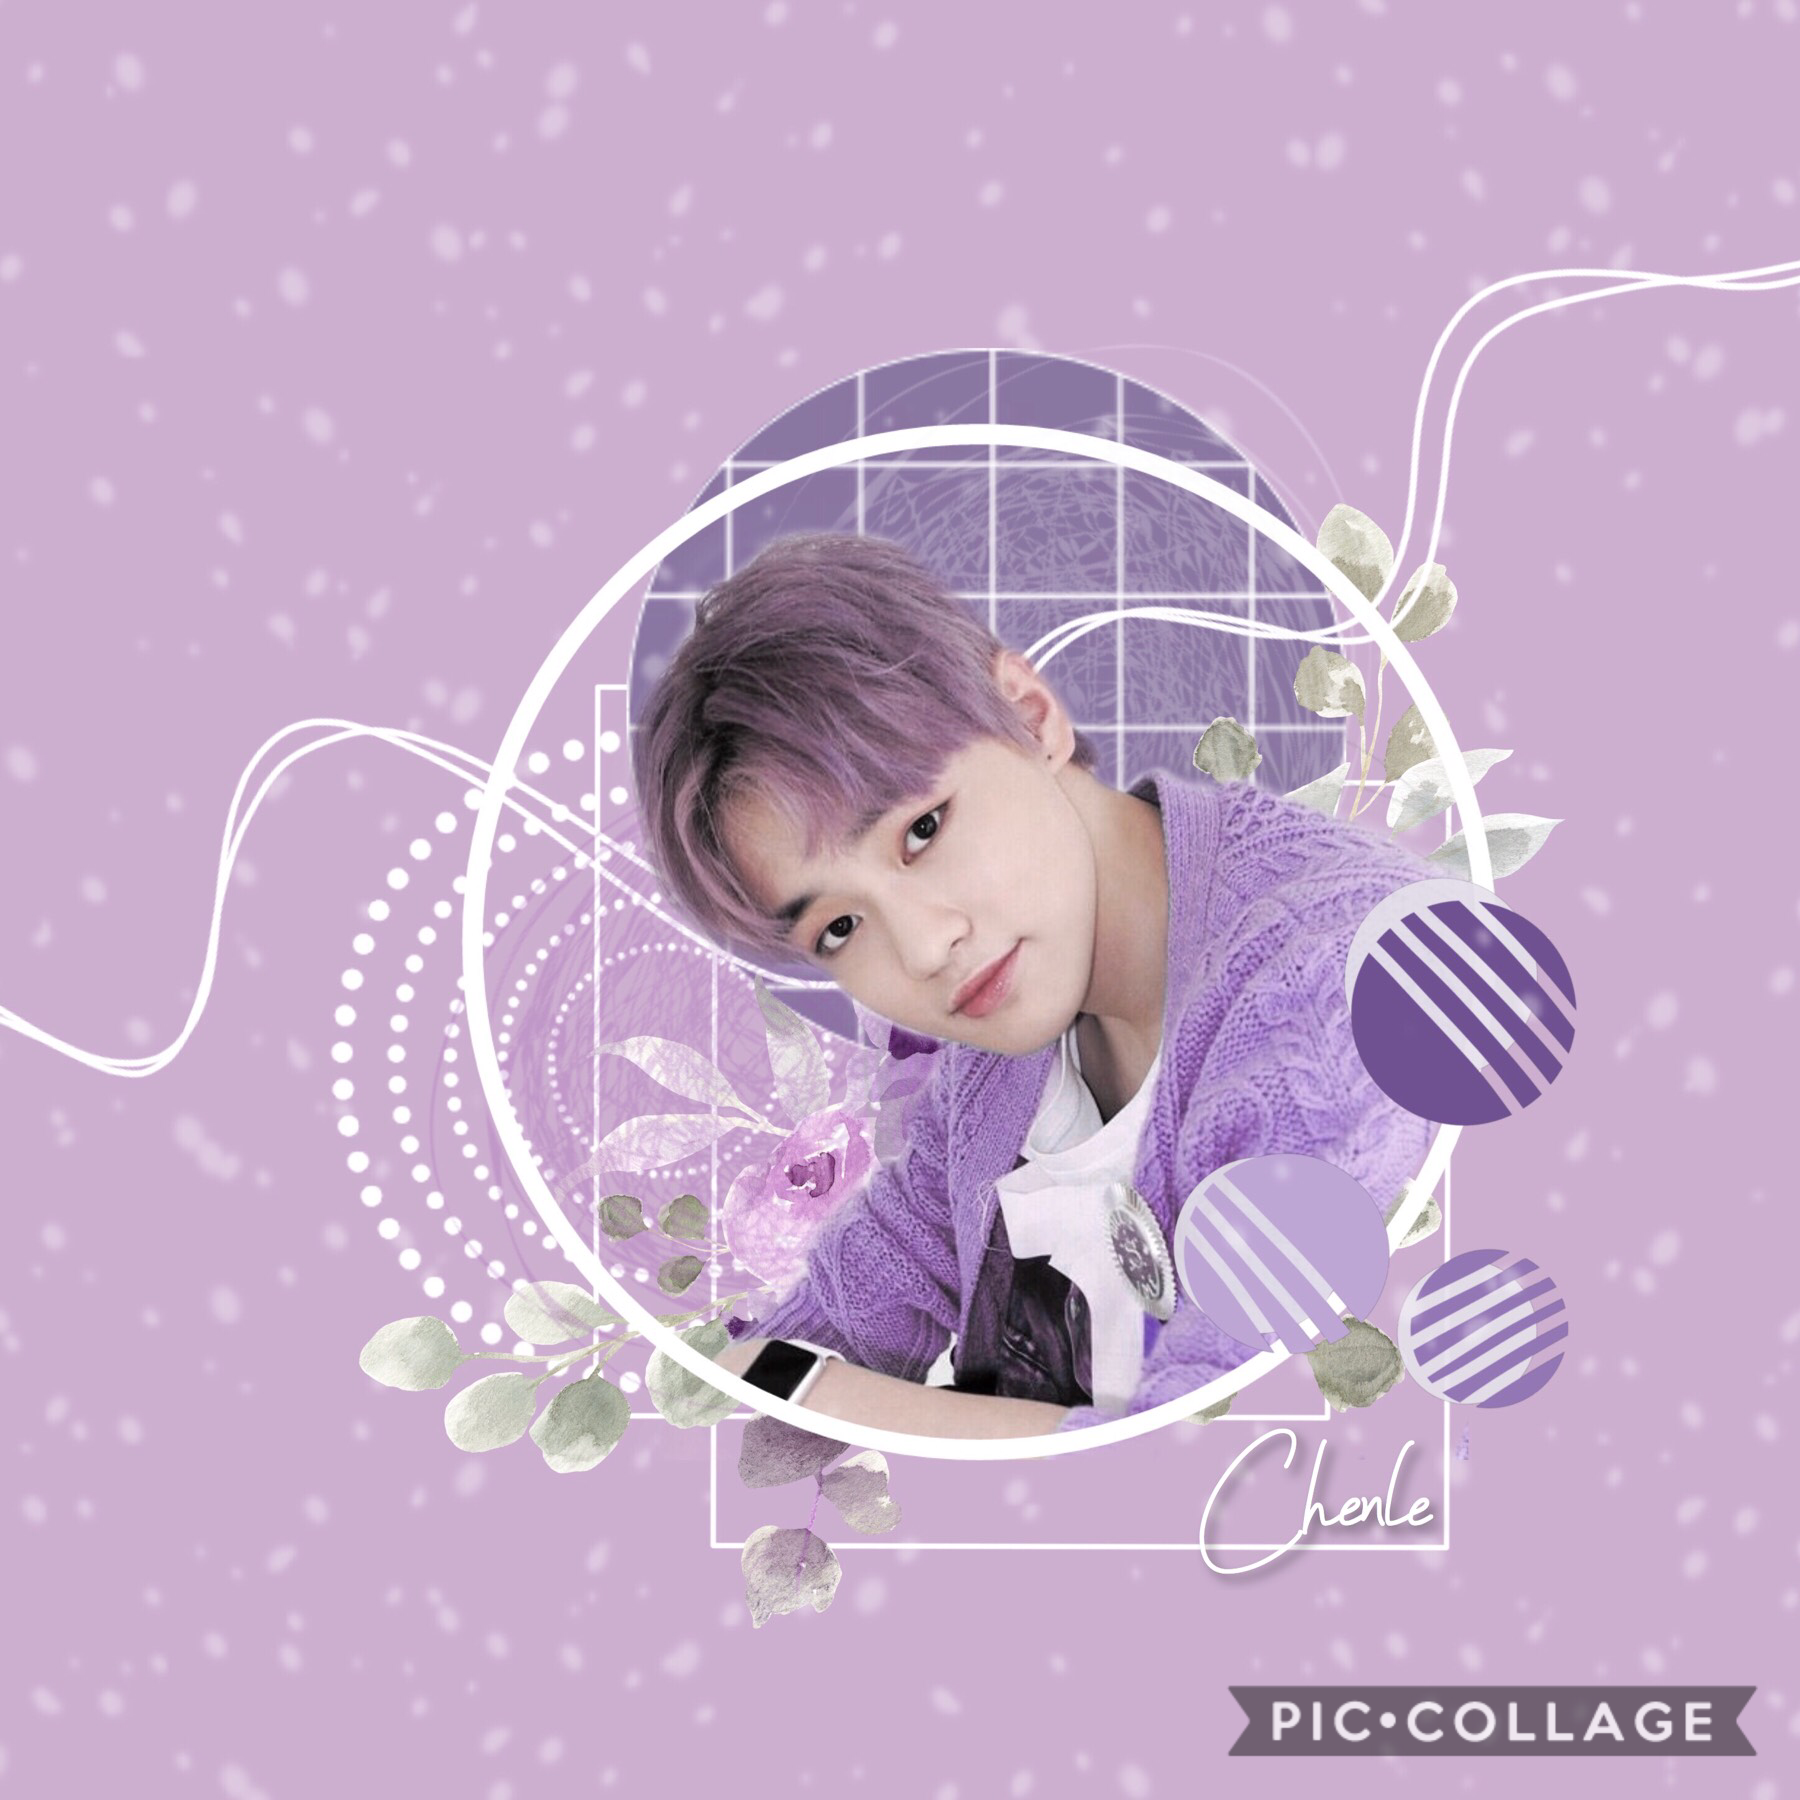 🔮Tap🔮
Hello everyone who decided to tap, I hope you’re having a great day😊
.
.
.
🥚—>🐣 —>🐥 —>🐔
